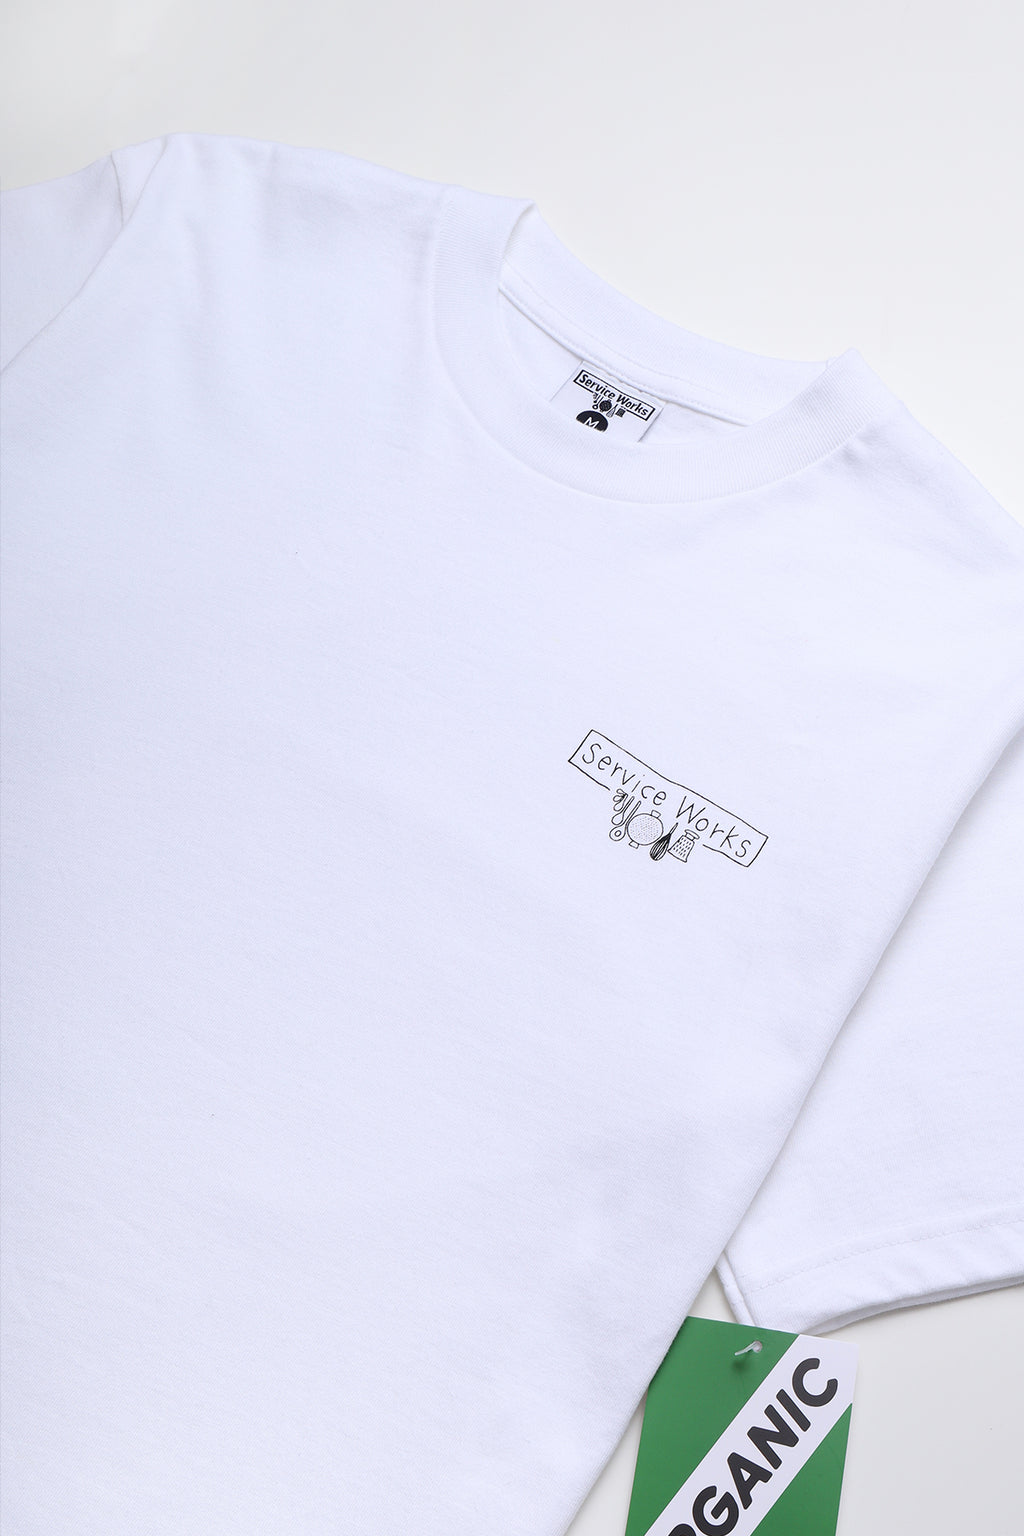 Service Works - Scribble Logo Tee - White